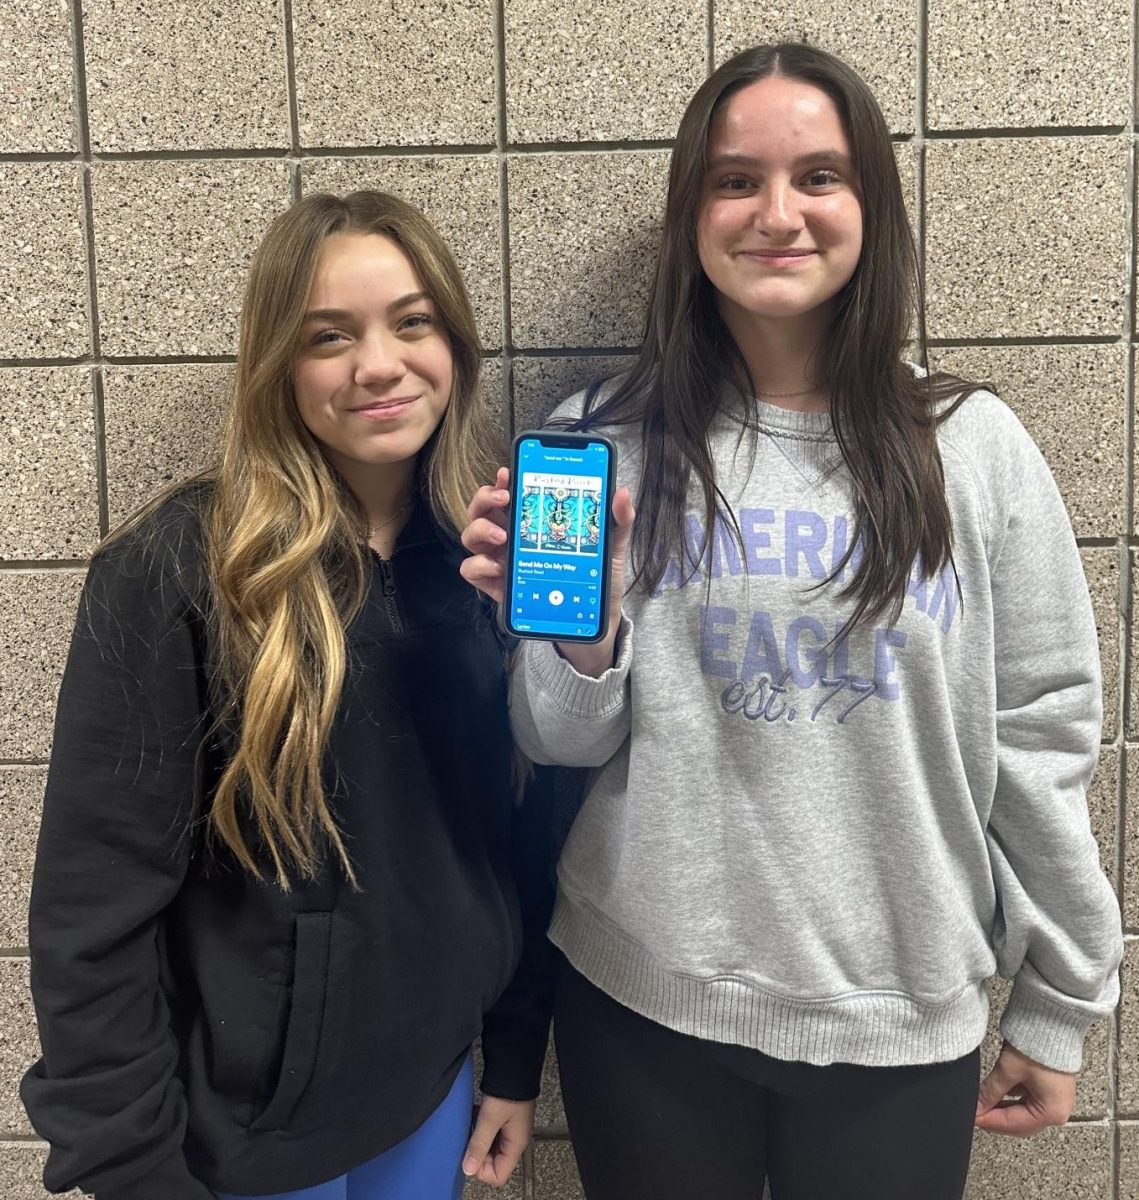 Freshmen Riley Dempsey and Leah Sonnentag listen to Send Me On My Way by Rusted Root. The two have enjoyed listening to this song together since camping up north in the summer.